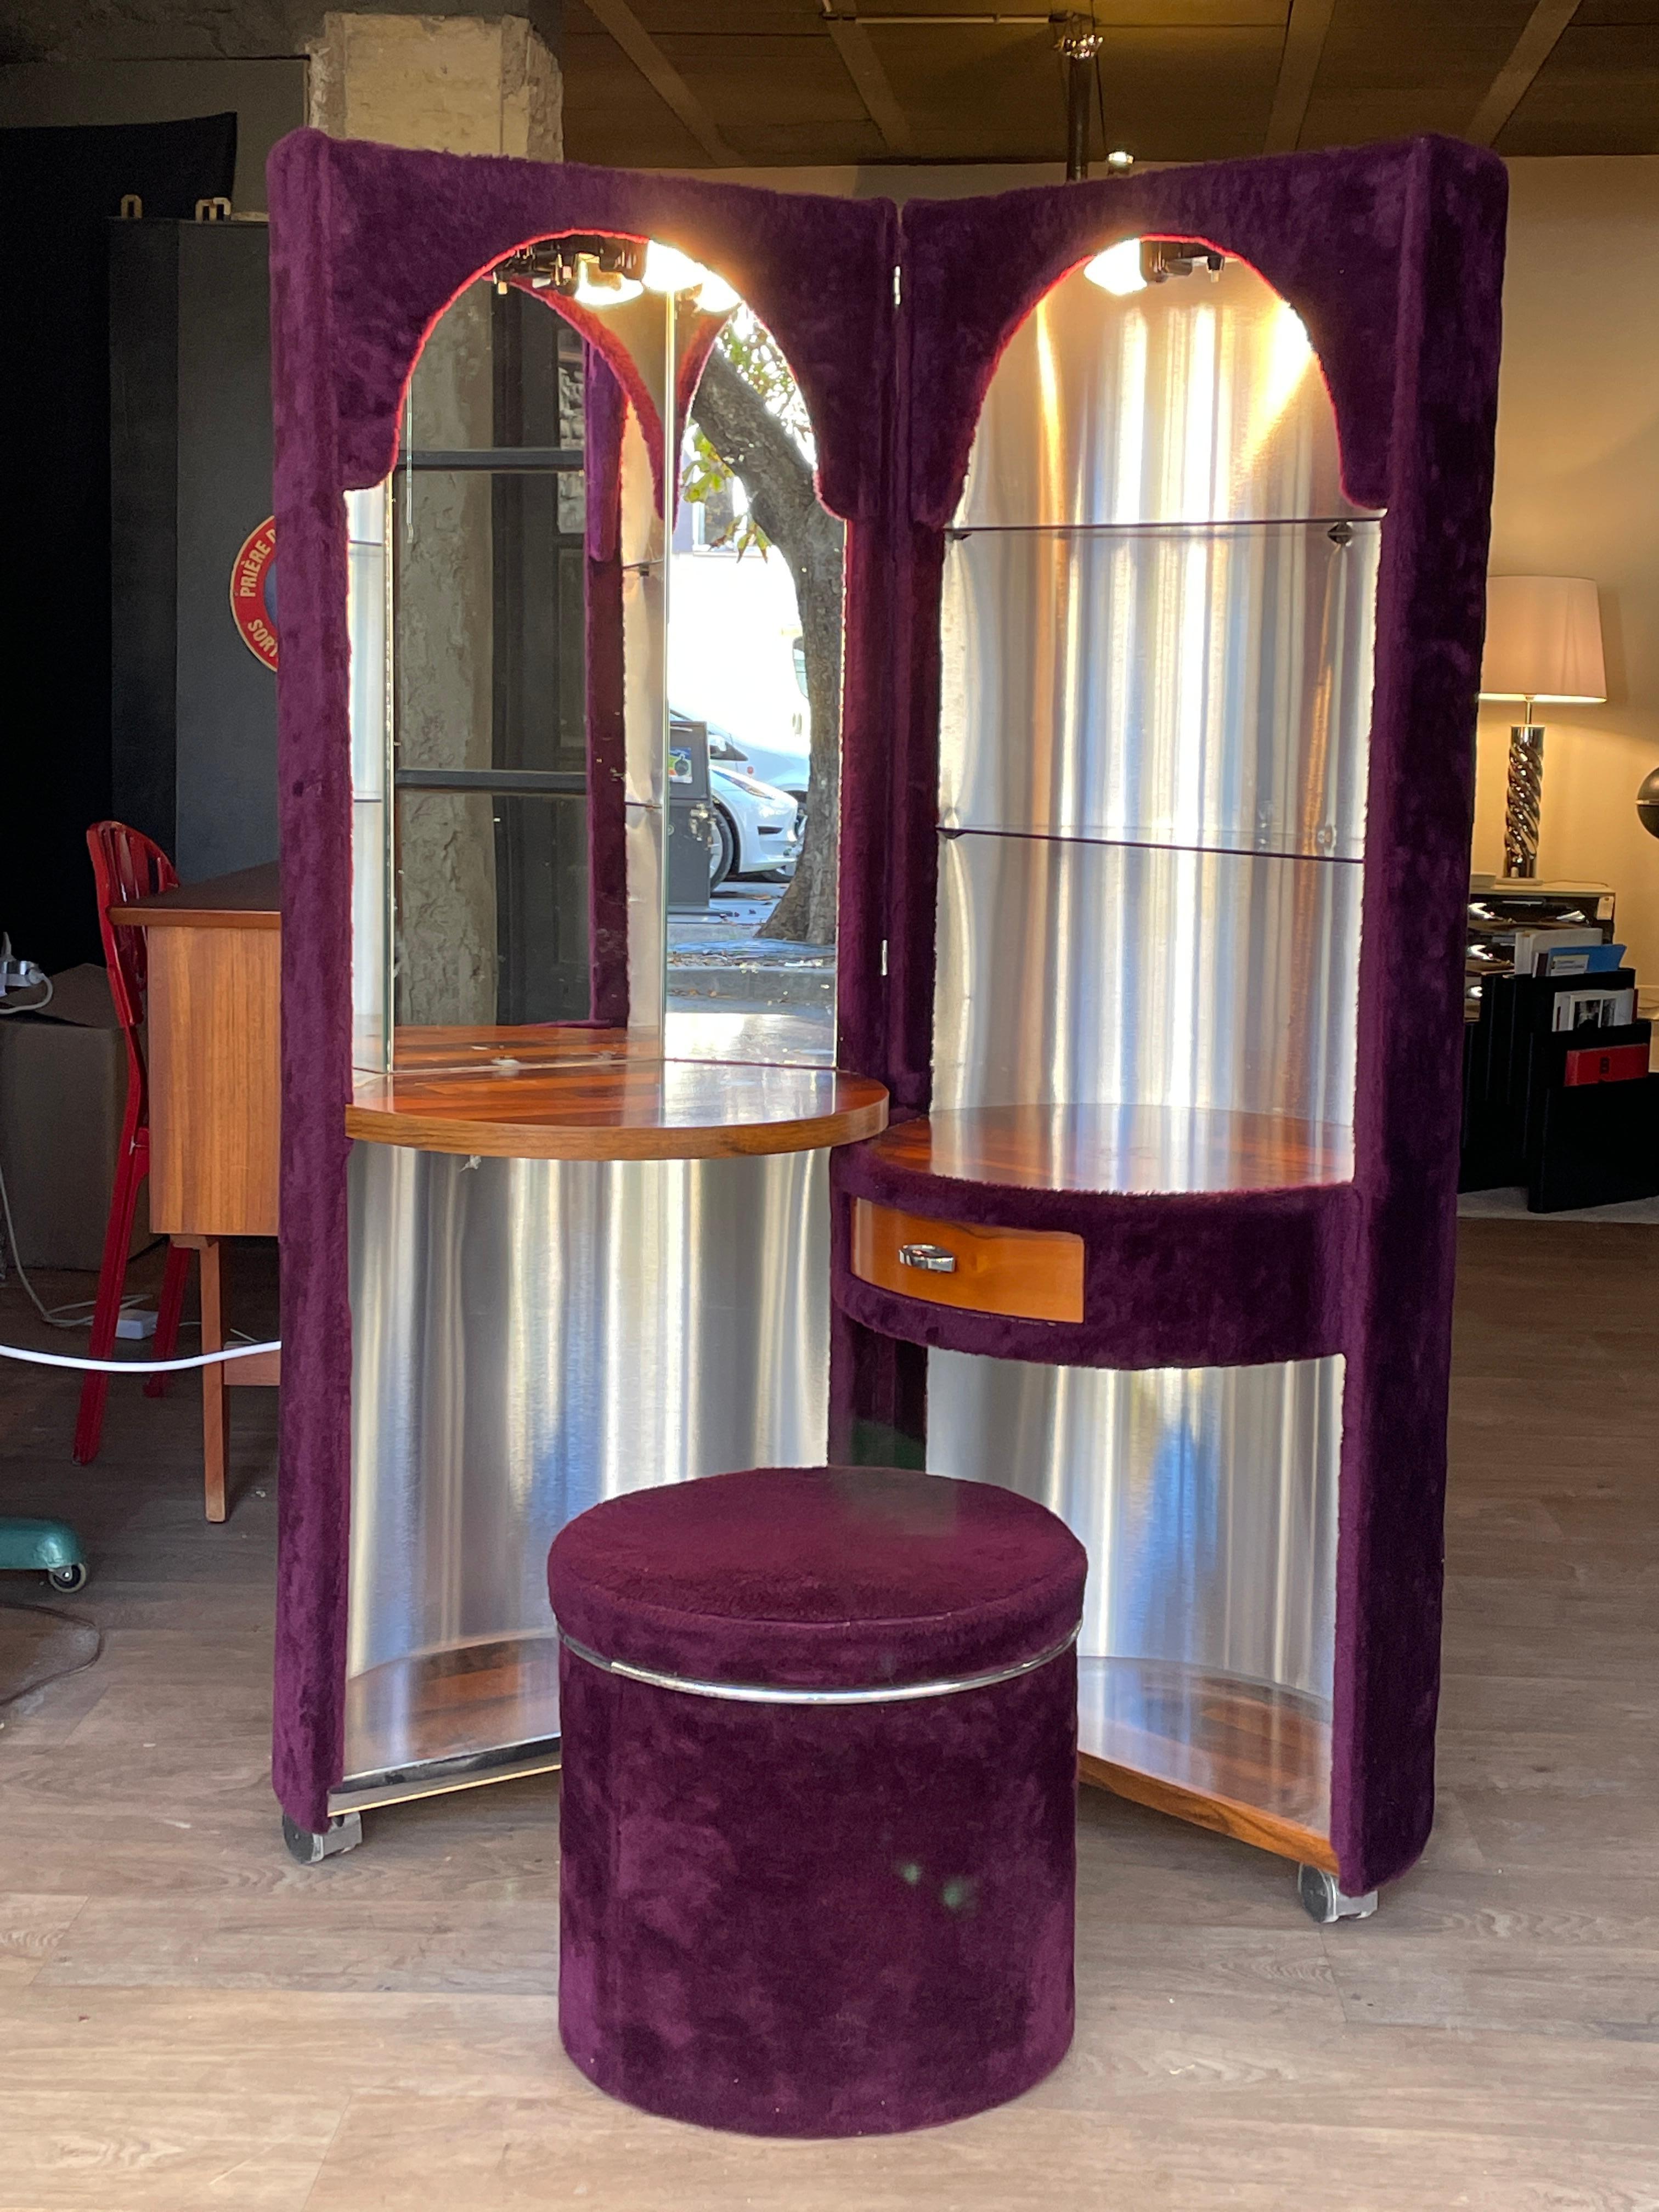 Dressing table - Vanitie 60-70 in fur, on wheel. integrated stool.
Two lightning system.
Purple.
For an interior pop, space age and vintage.
In the style of Willy Rizzo, Knoll, Ico Parisi, Romeo Rega, Eames. Raymon Loewy, Guzzini, Joe COLOMBO,